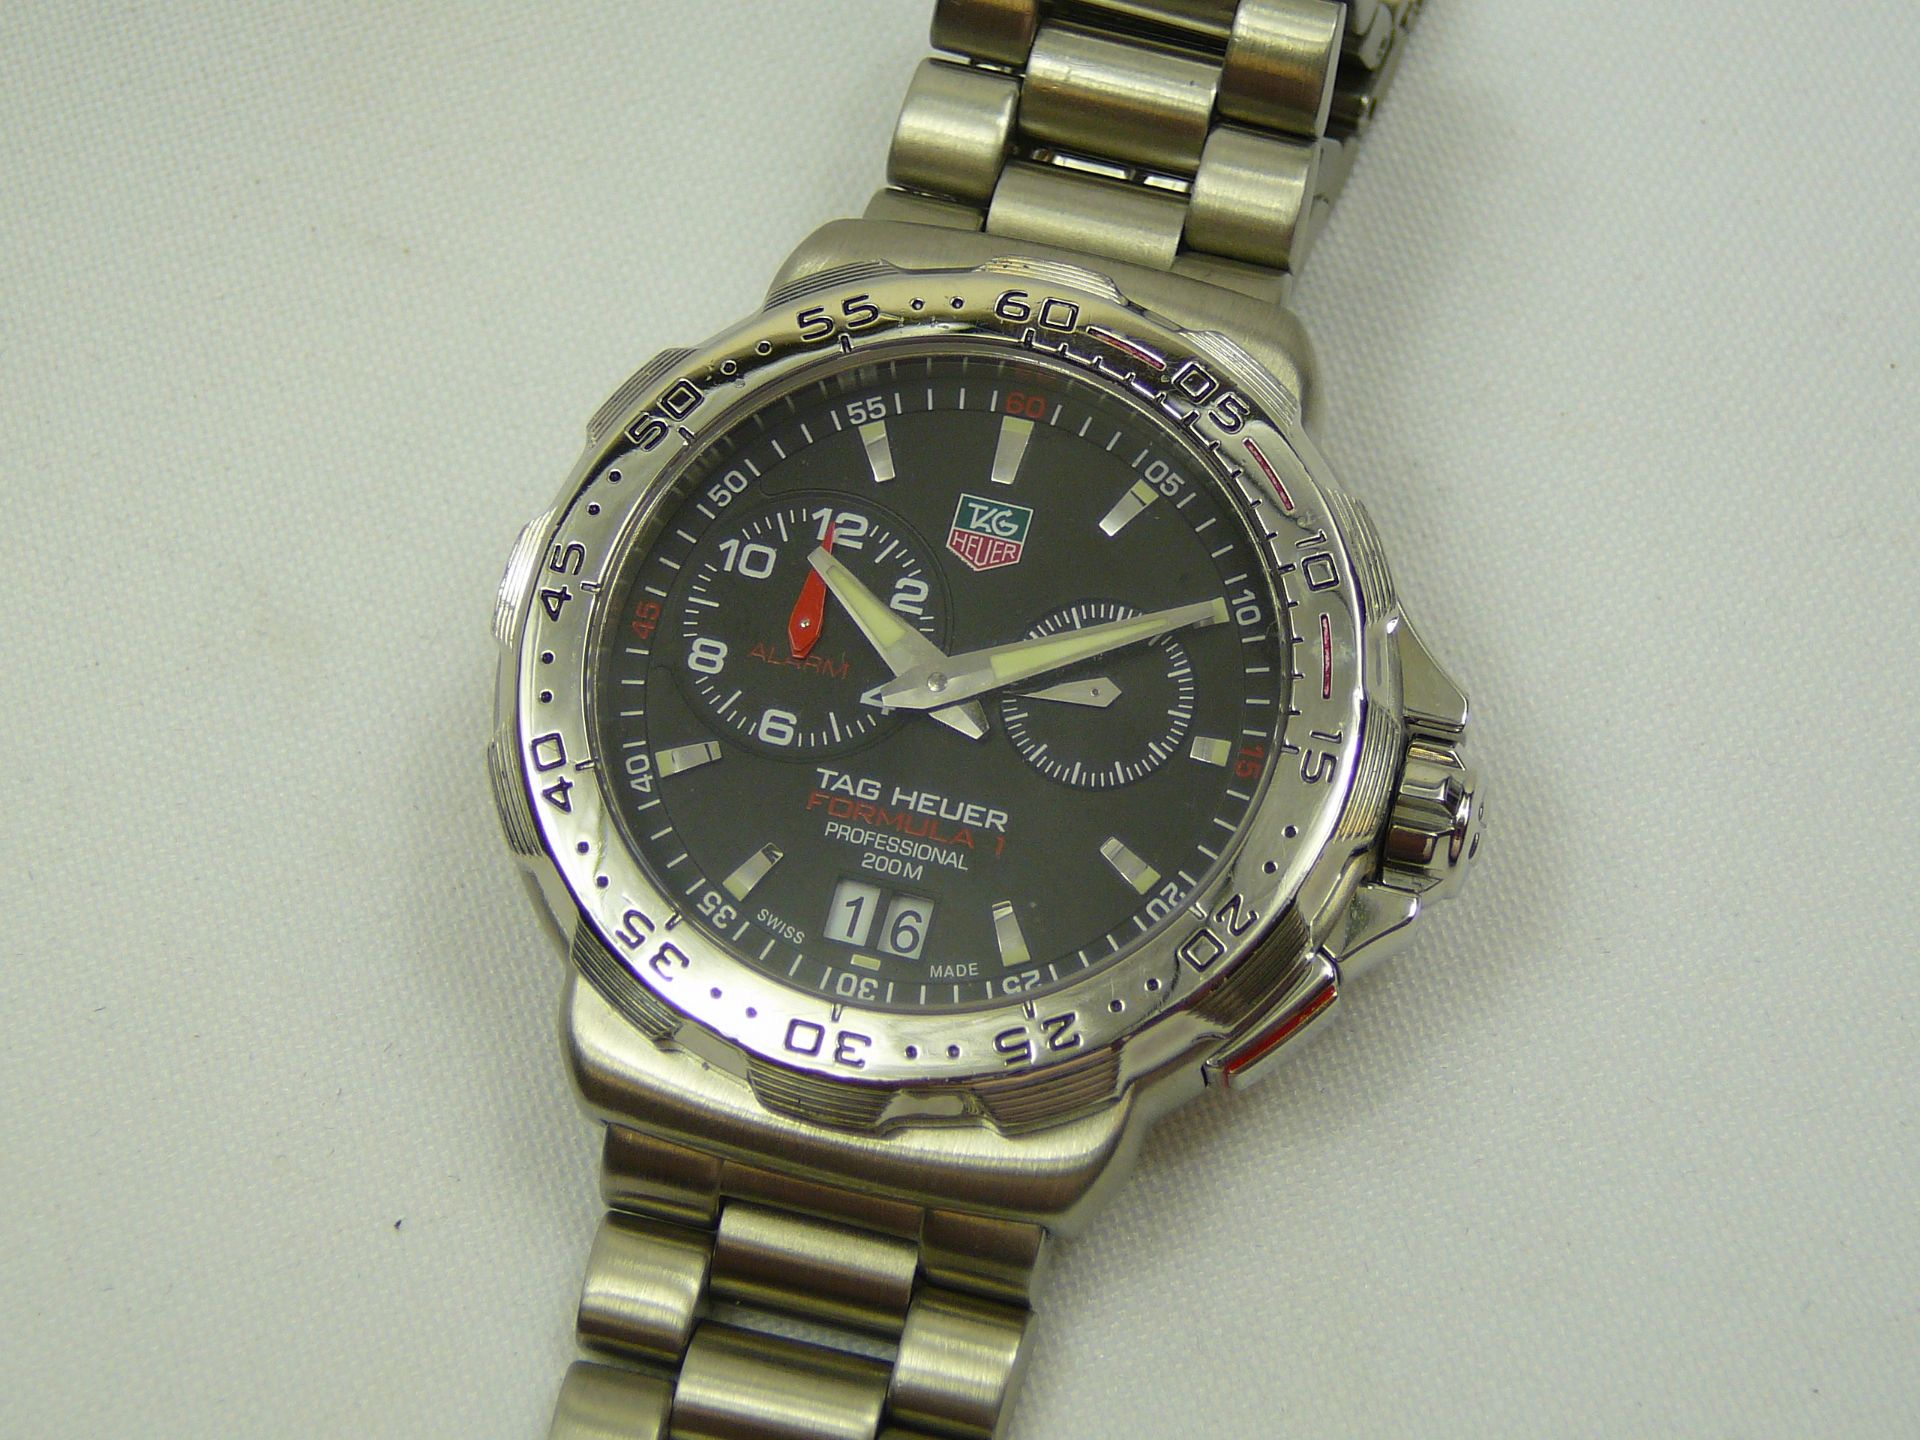 Gents TAG Heuer Wrist Watch - Image 2 of 3